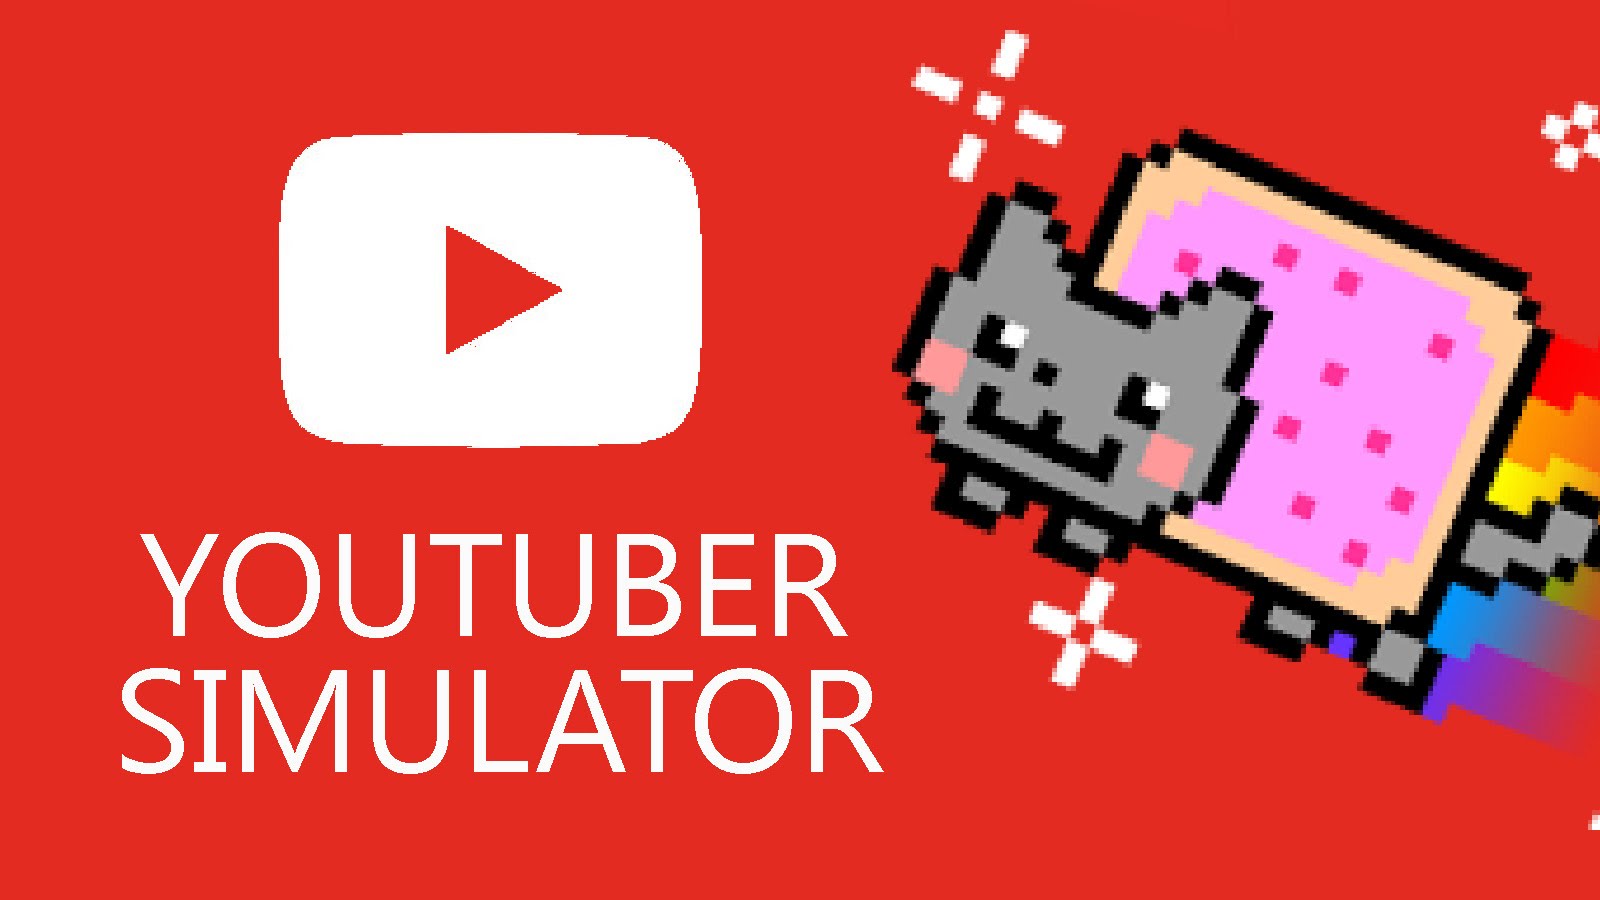 Famous Youtuber Plays A Youtube Simulator Game Humorously